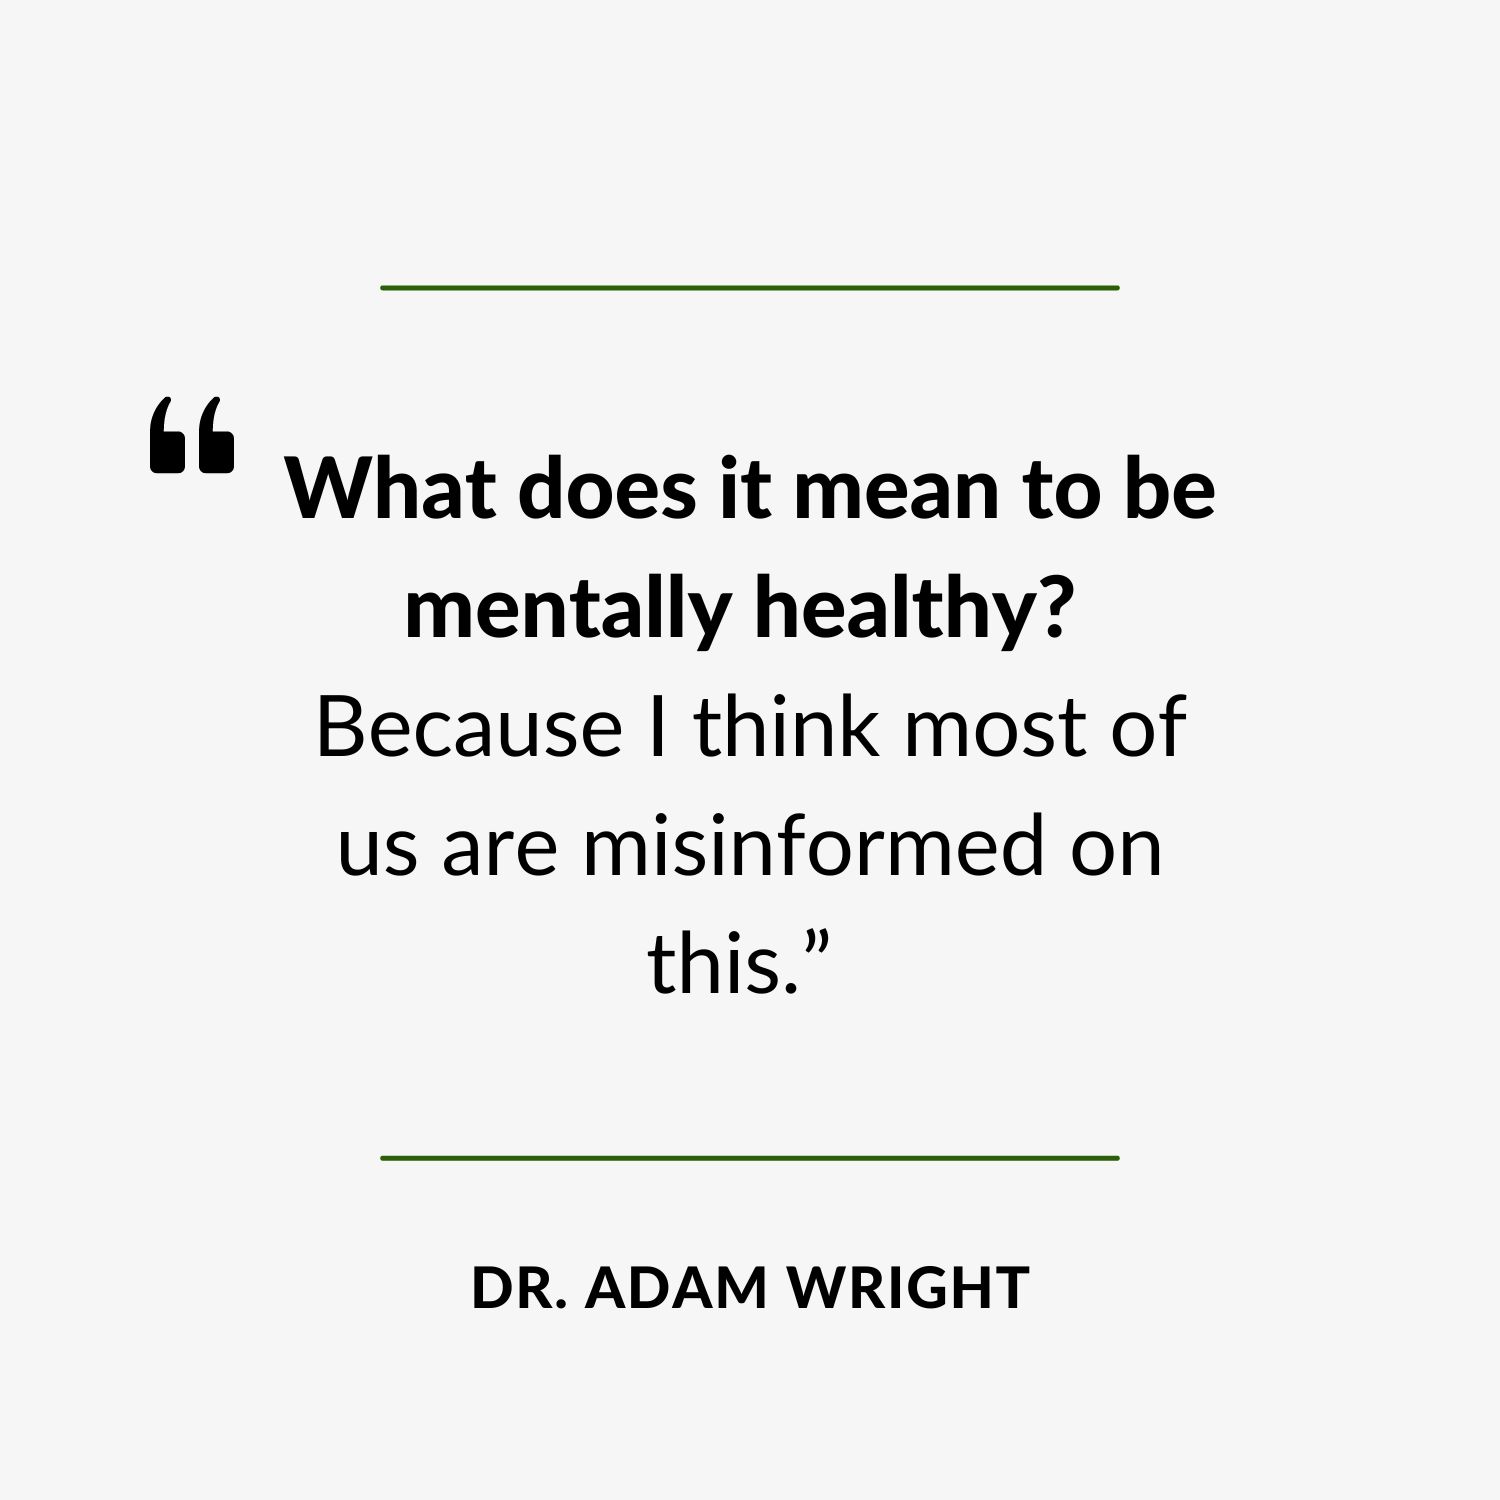 Website Quote, “What does it mean to be mentally healthy Because I think most of us are misinformed on this.”